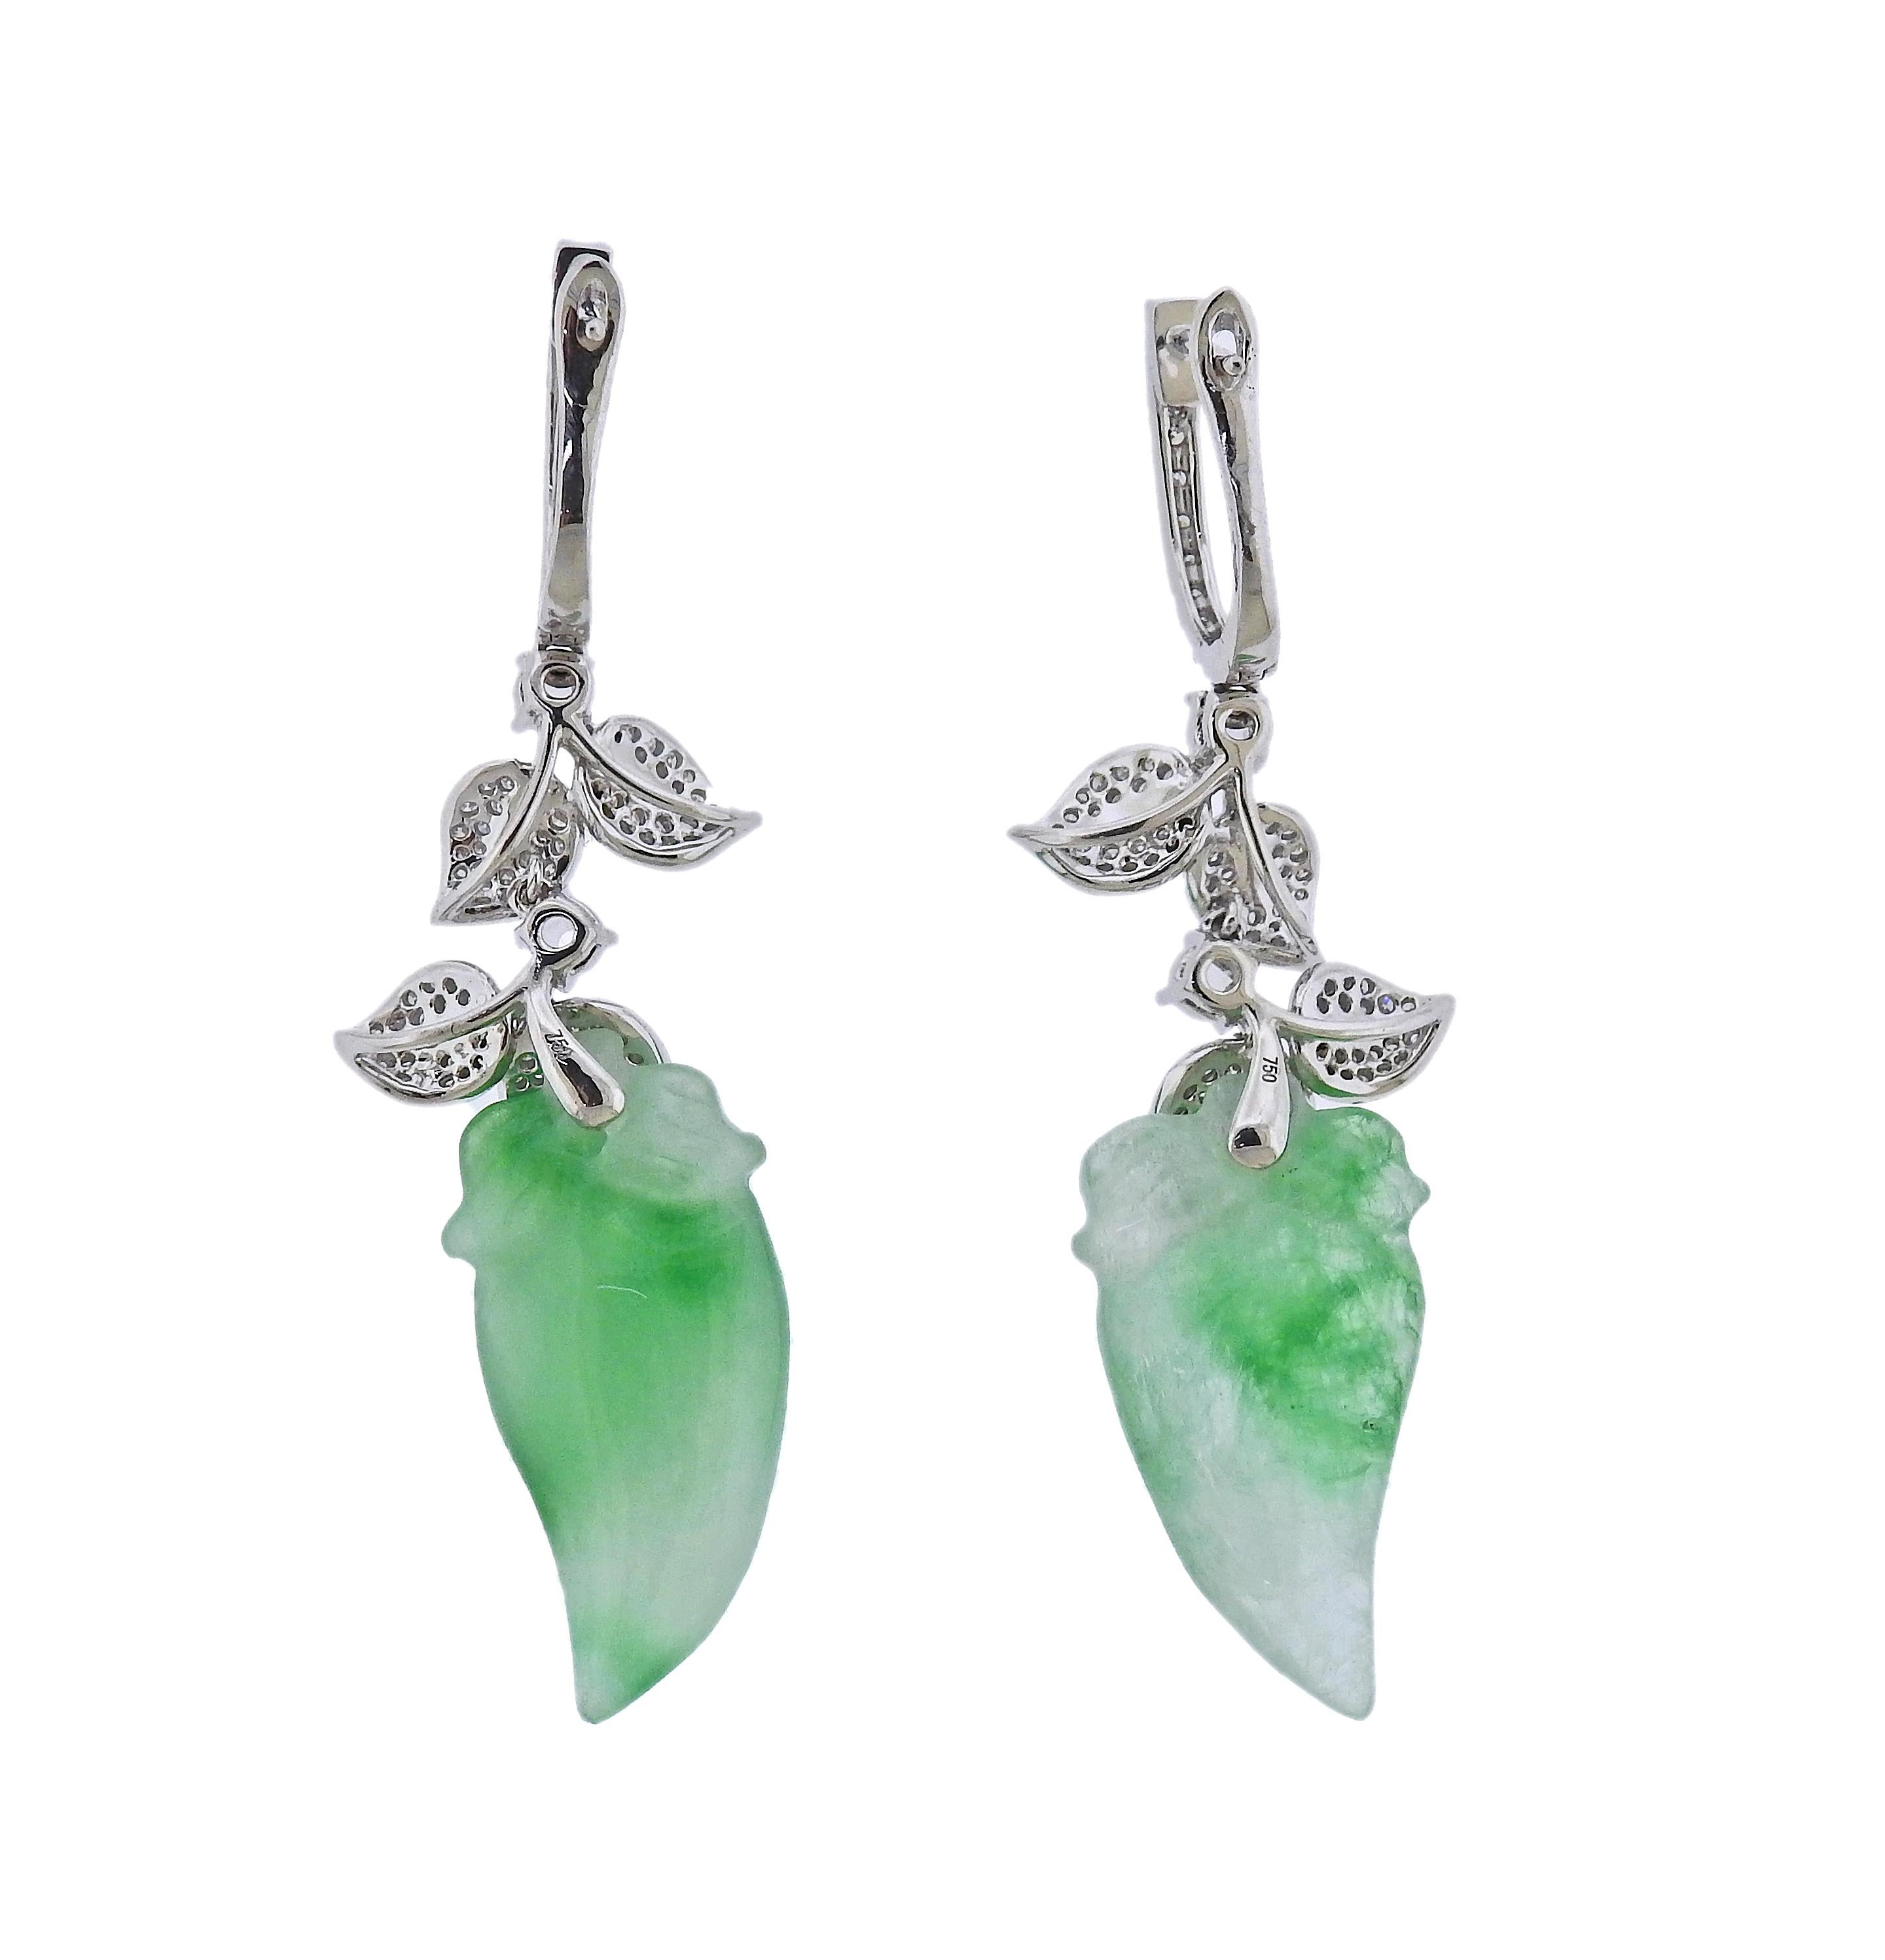 Pair of 18k gold drop earring, with 21.86ctw carved jadeite jade, and 0.81ctw diamonds. Earrings are 51mm long. Marked 750. Weight - 10.6 grams.